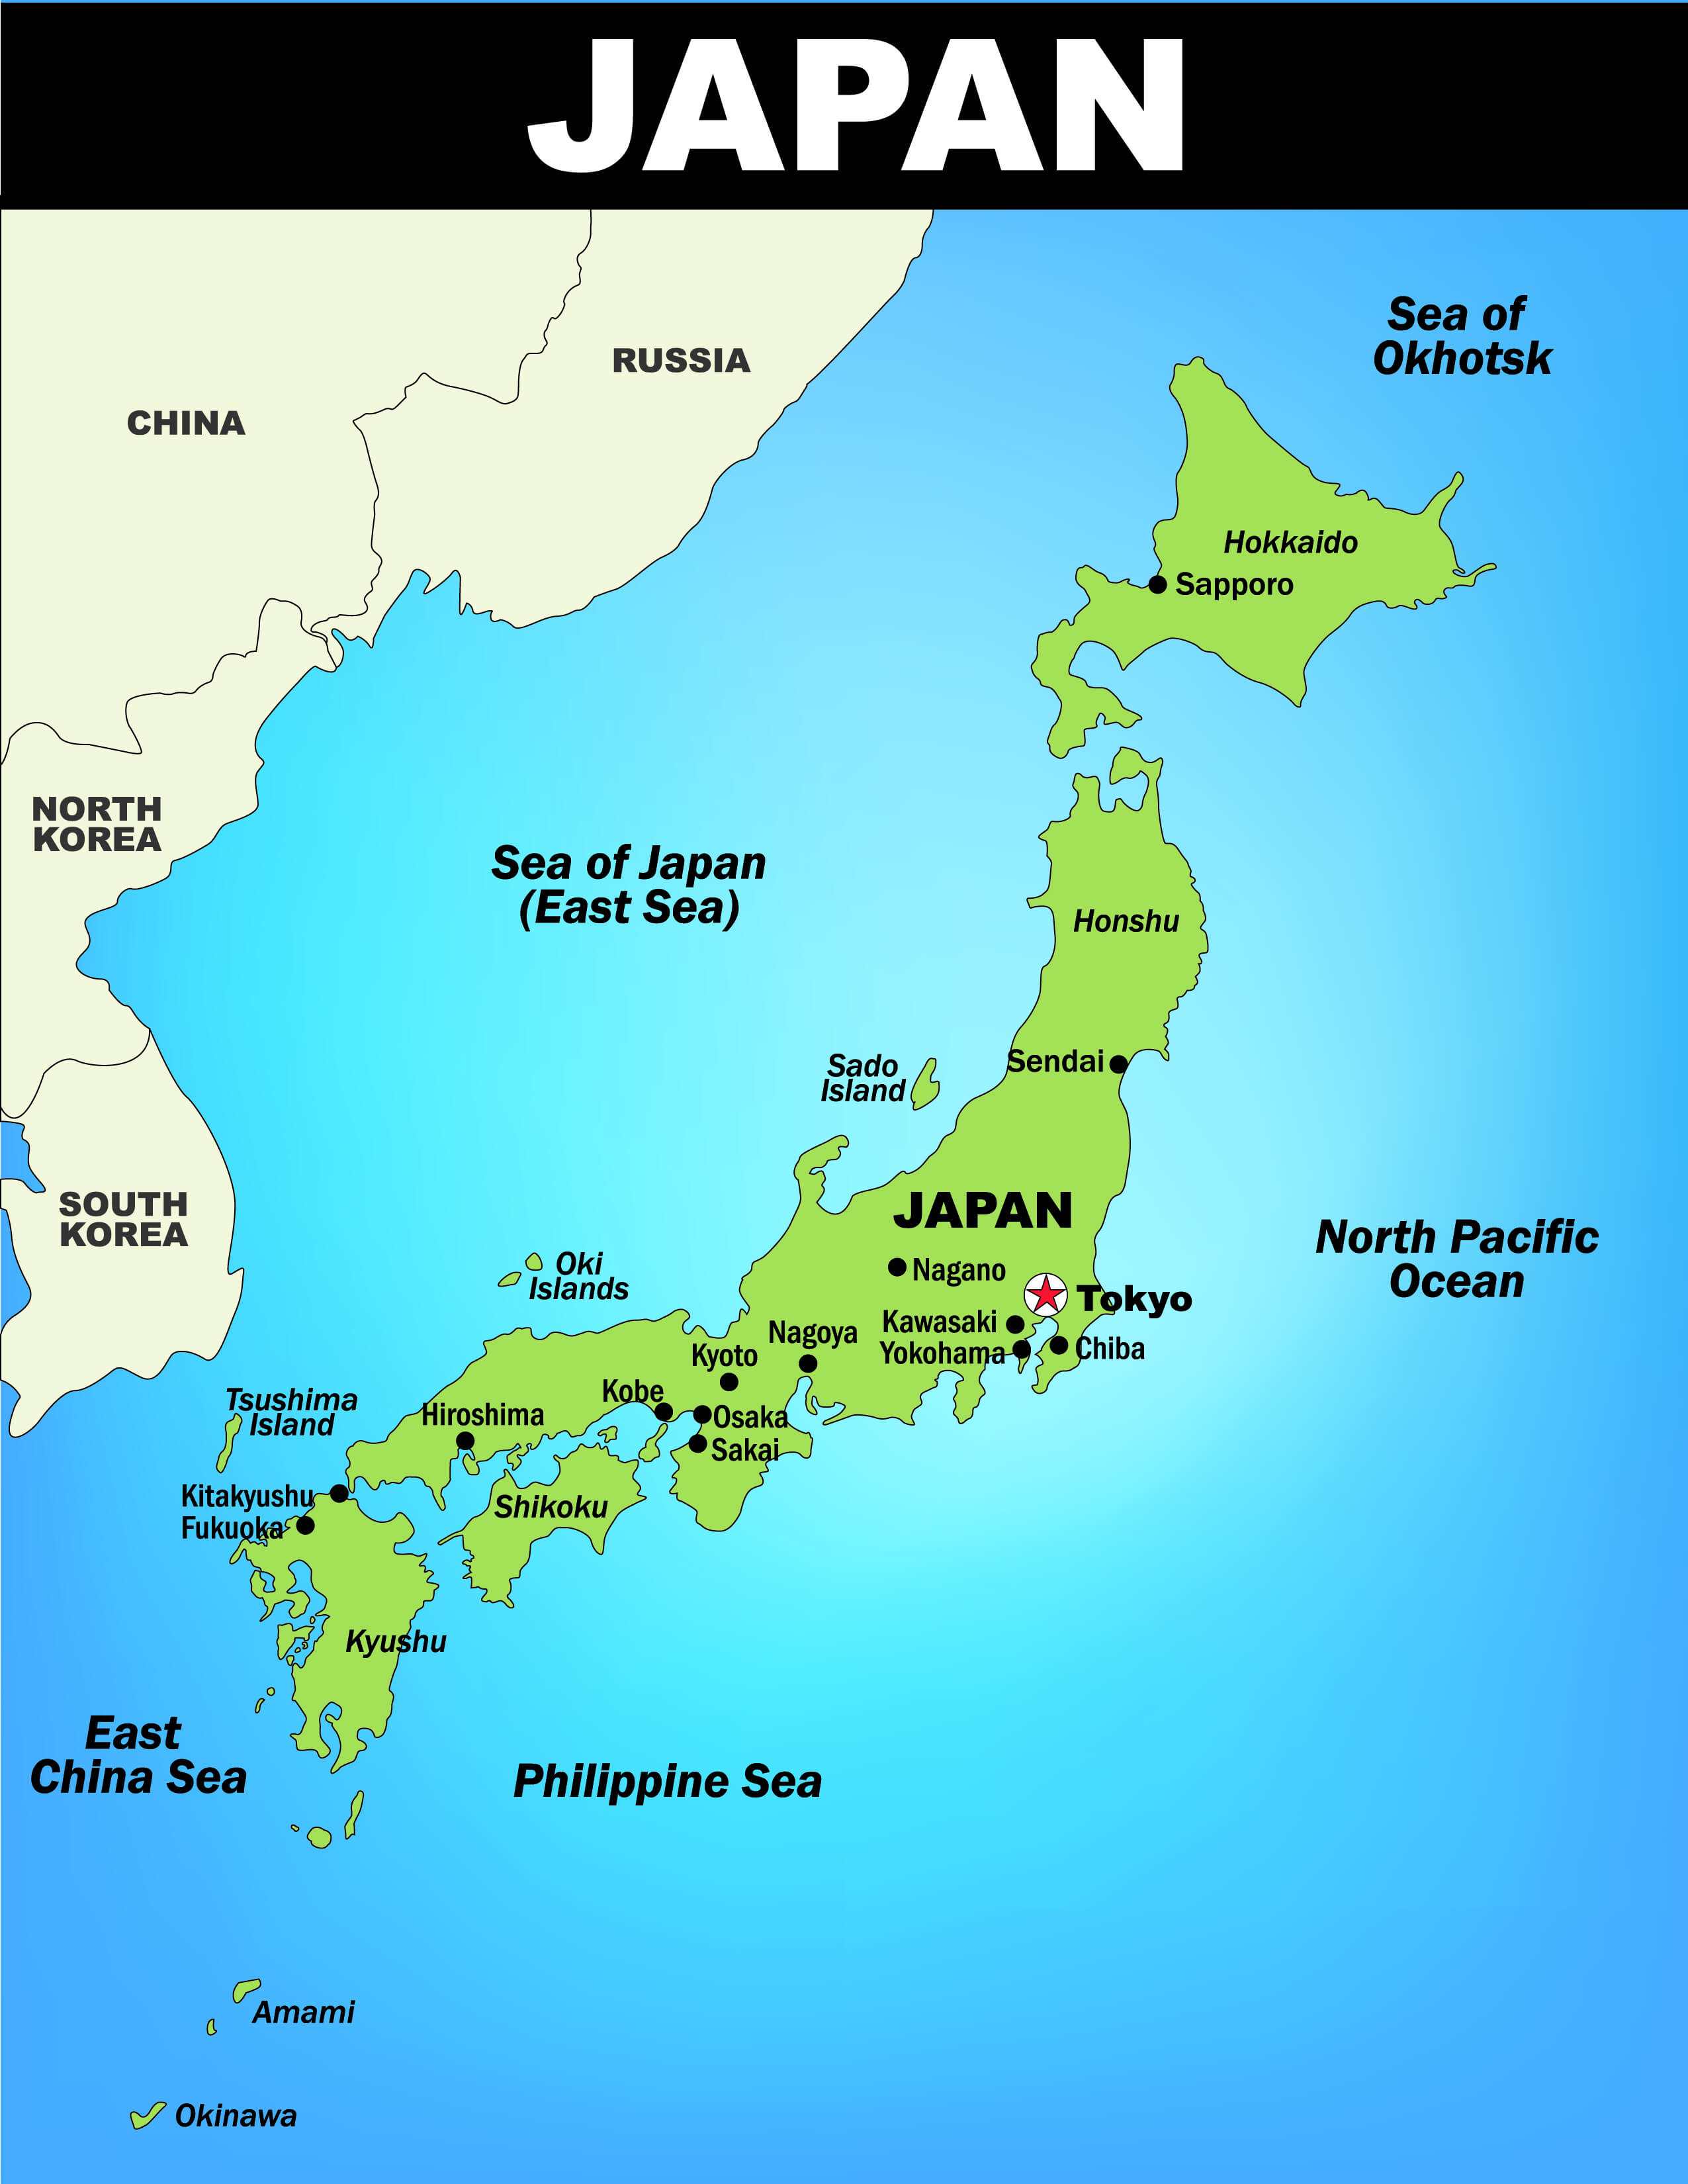 Japan Map - Guide of the World